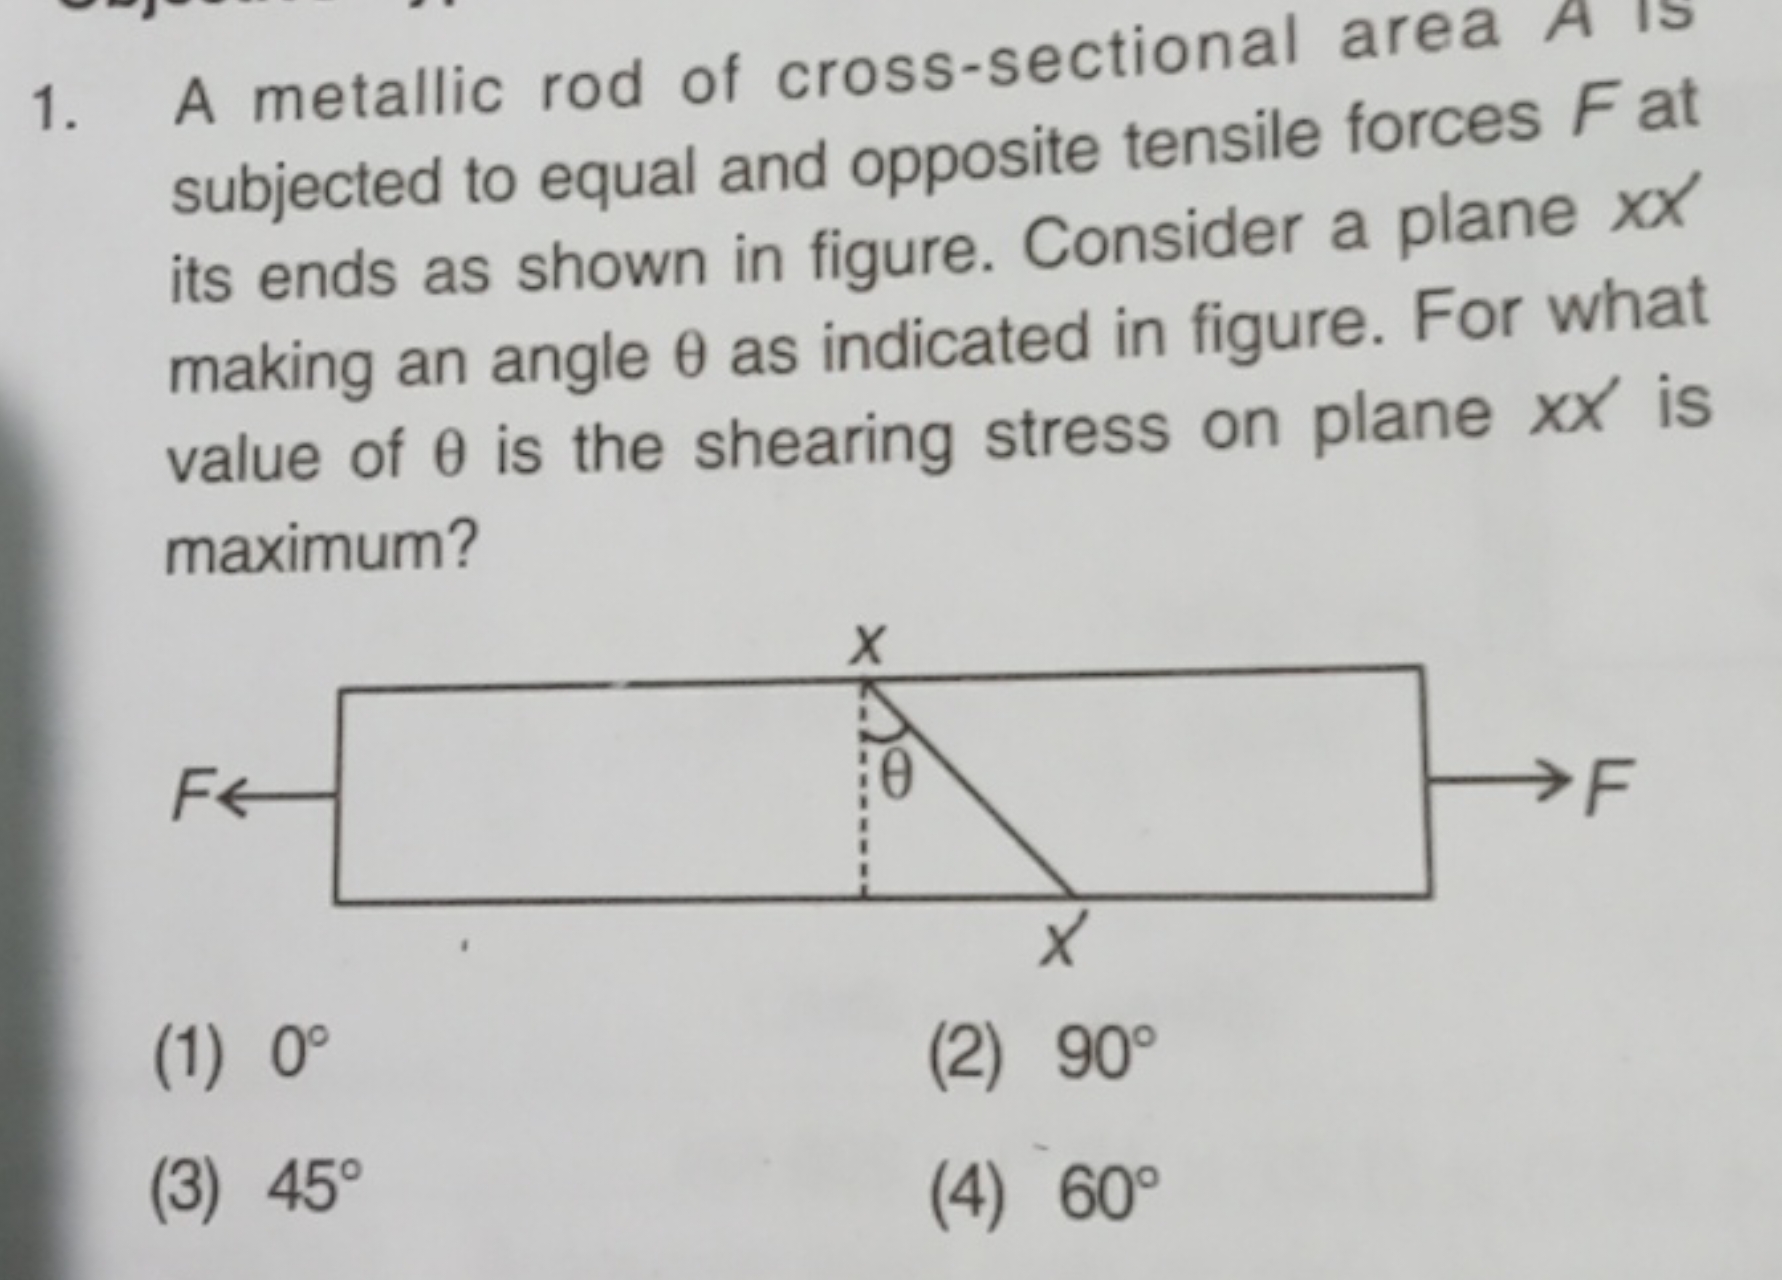 A metallic rod of cross-sectional area A is subjected to equal and opp